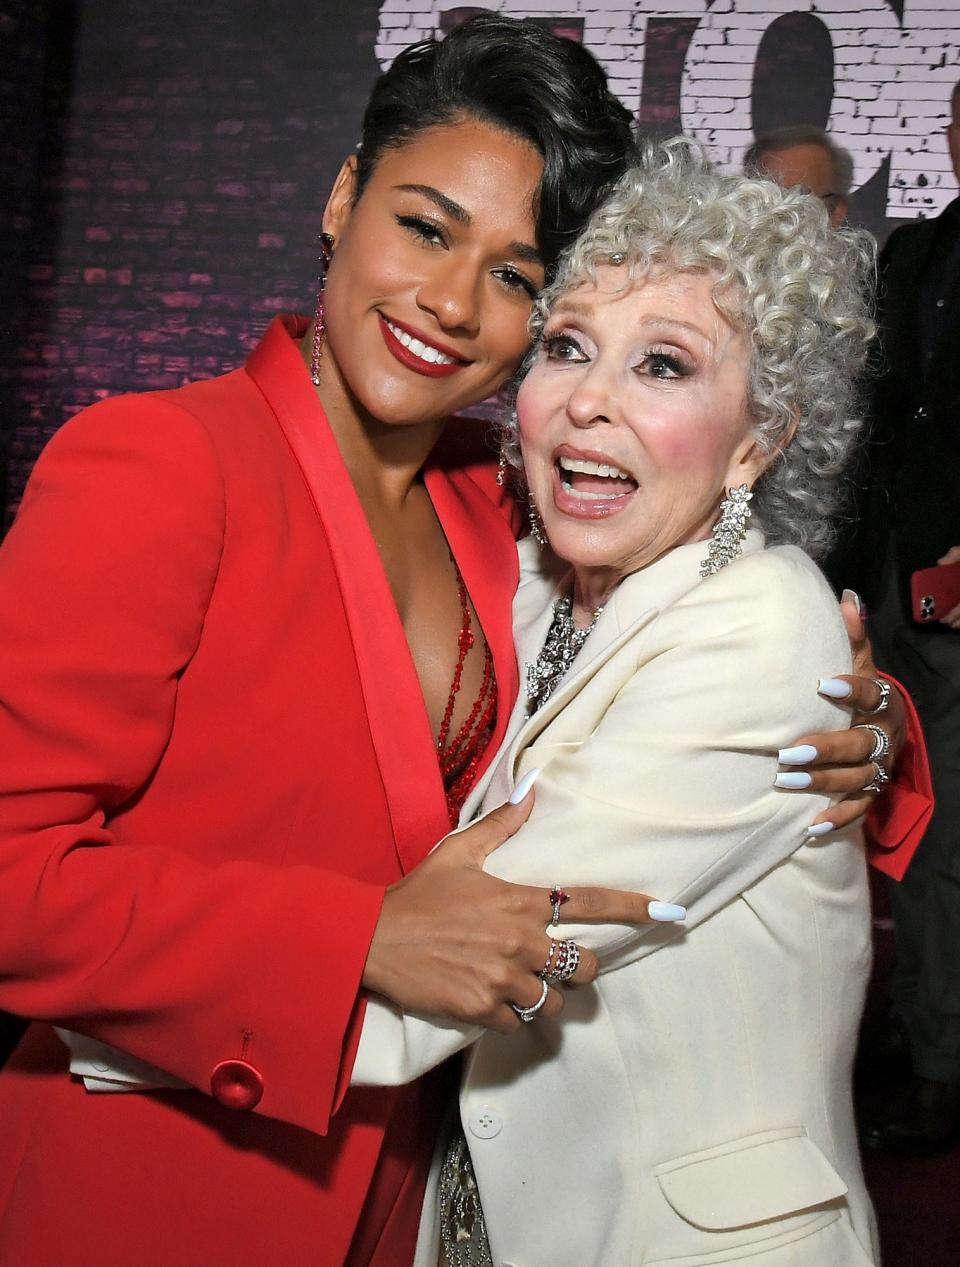 Ariana DeBose and Rita Moreno embrace at the "West Side Story" premiere in Los Angeles in 2021